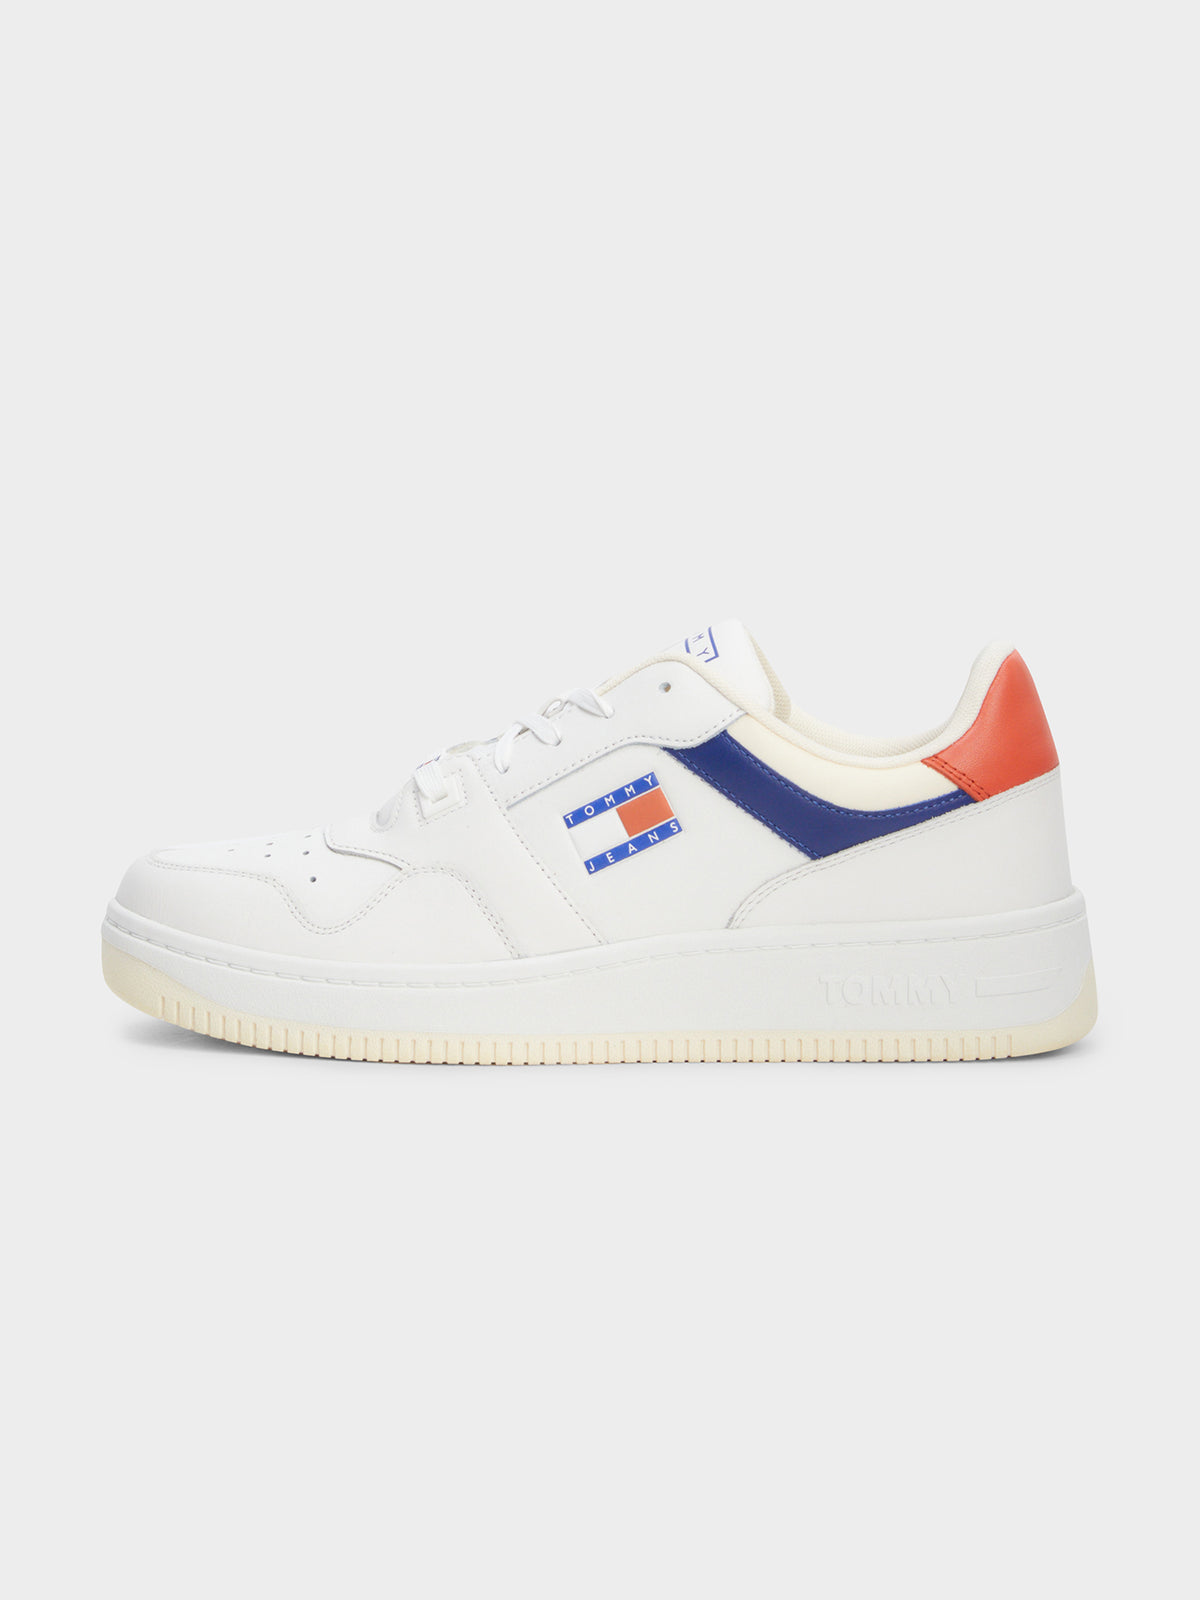 Mens Premium Leather Colour-blocked Basketball Trainers in White